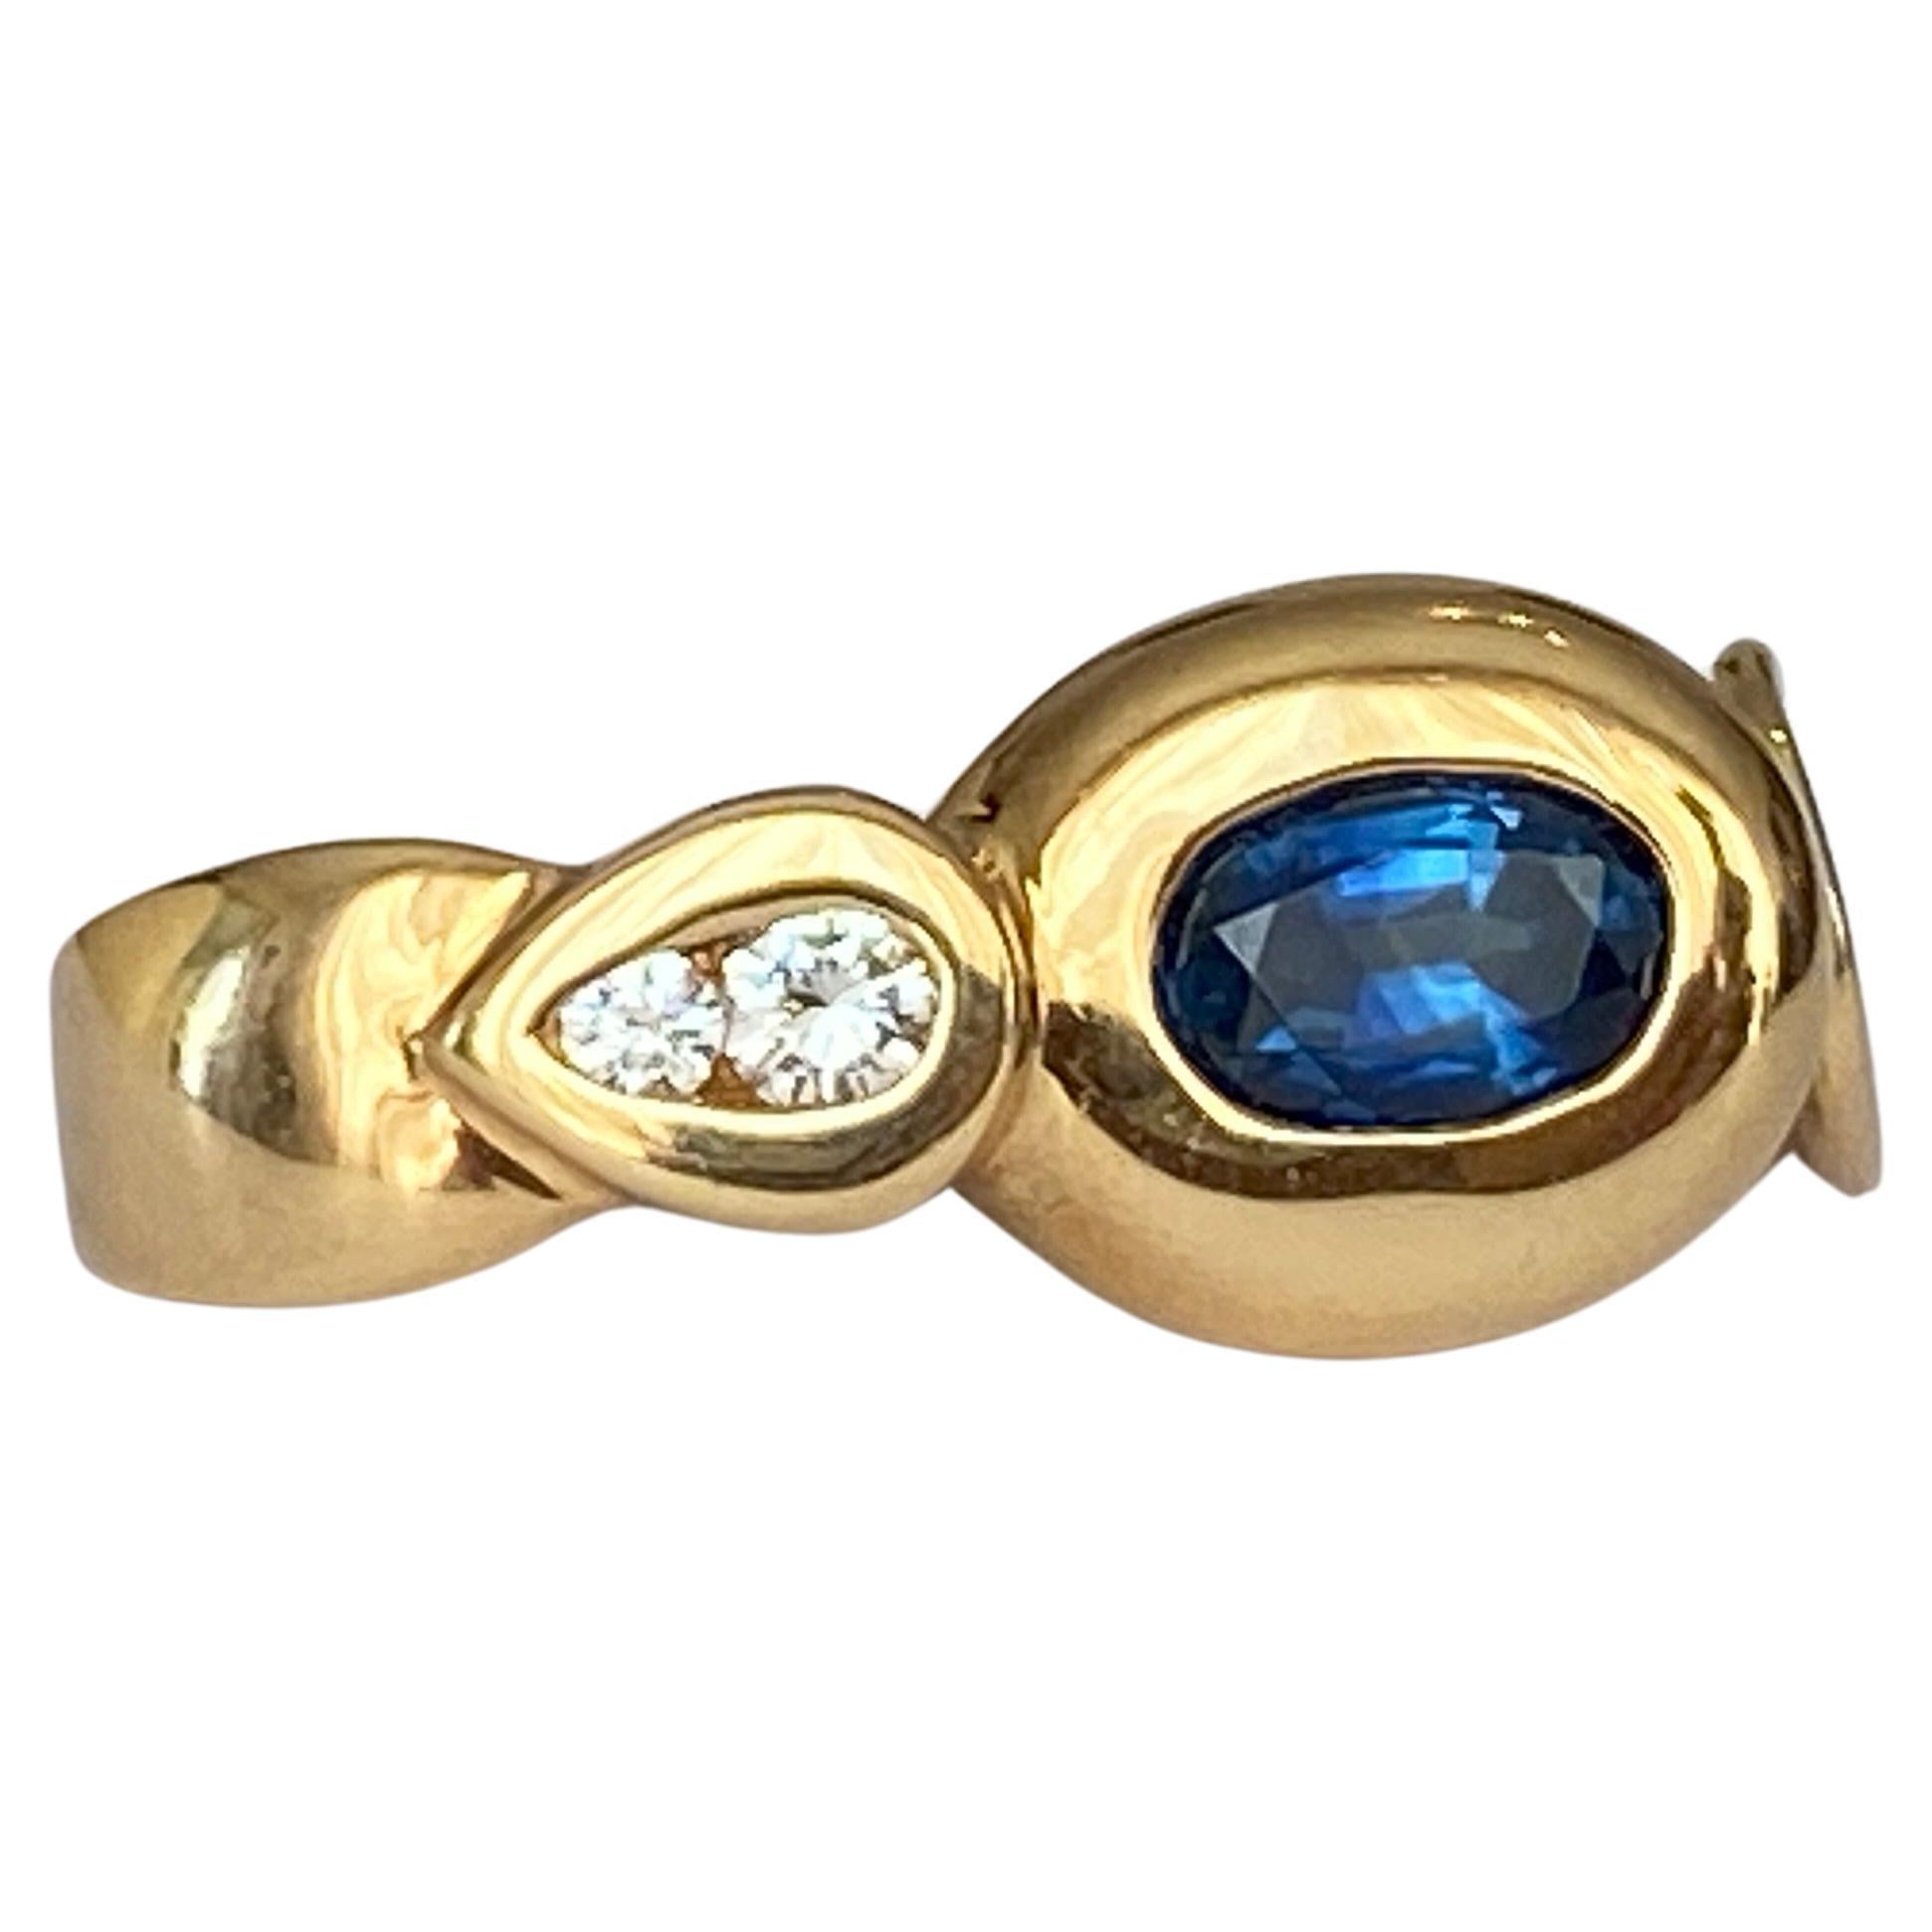 Beautiful  clip pendant made of 18-karat yellow gold. The pendant is set in the middle with a oval cut good quality sapphire of 0.68 ct . The pendant is surrounded by 2 pieces of brilliant cut diamonds 0.08 ct of the quality F/VVS.
Condition: good